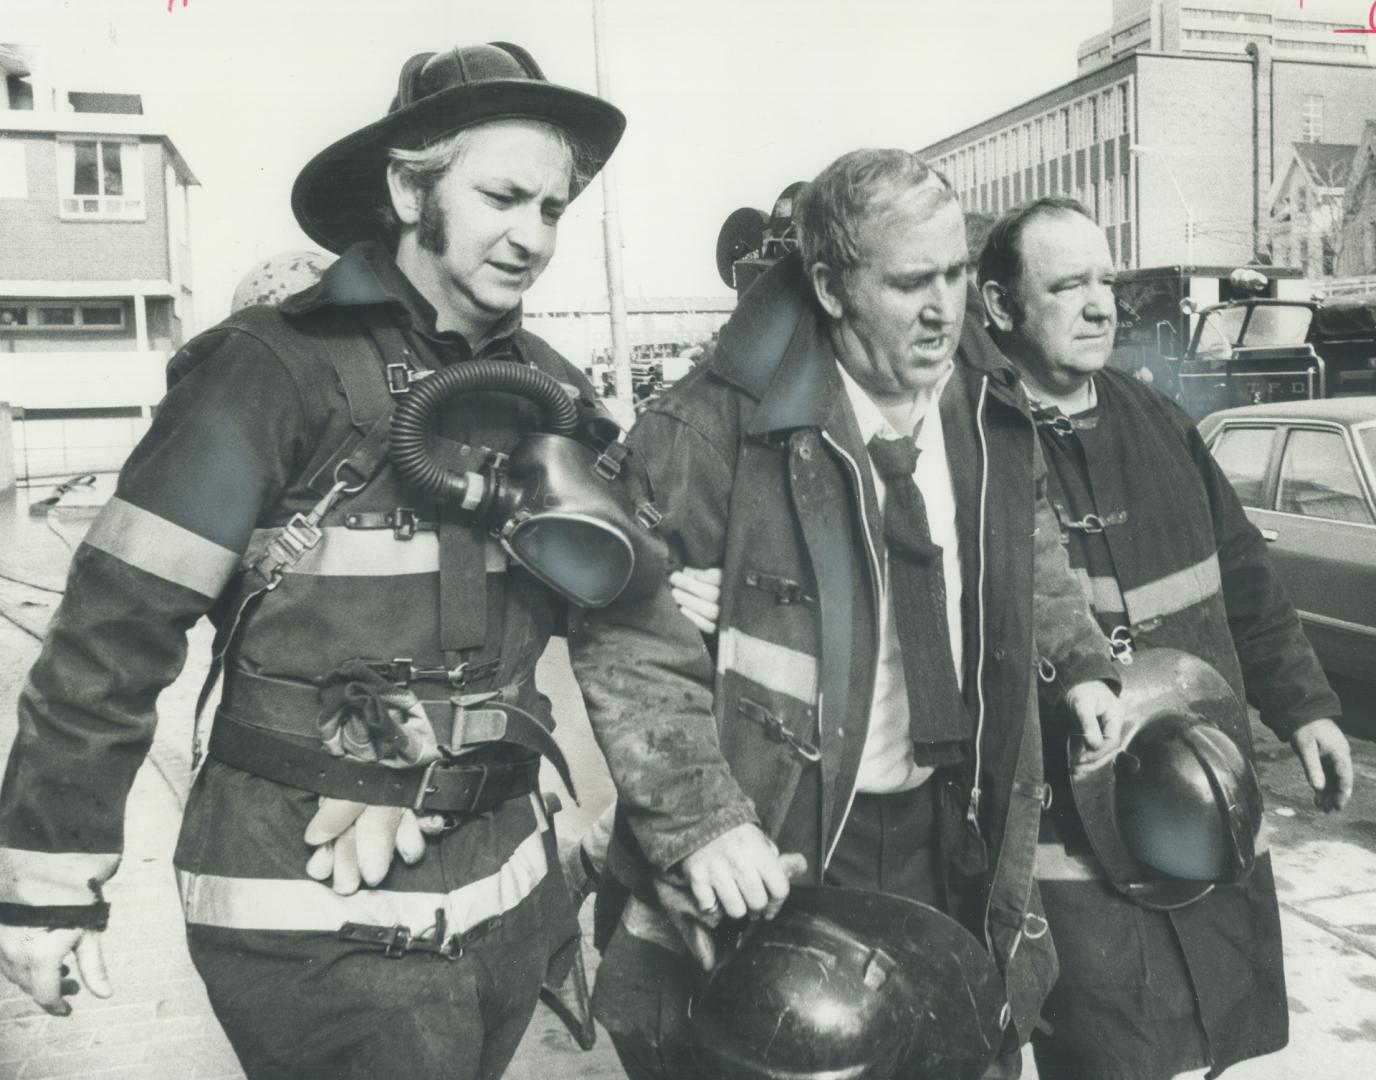 Toronto platoon Chief Jack McMurray (middle) gets help from Robert Richard (in helmet) and Bill Terrell (at right) after he was overcome by smoke figh(...)